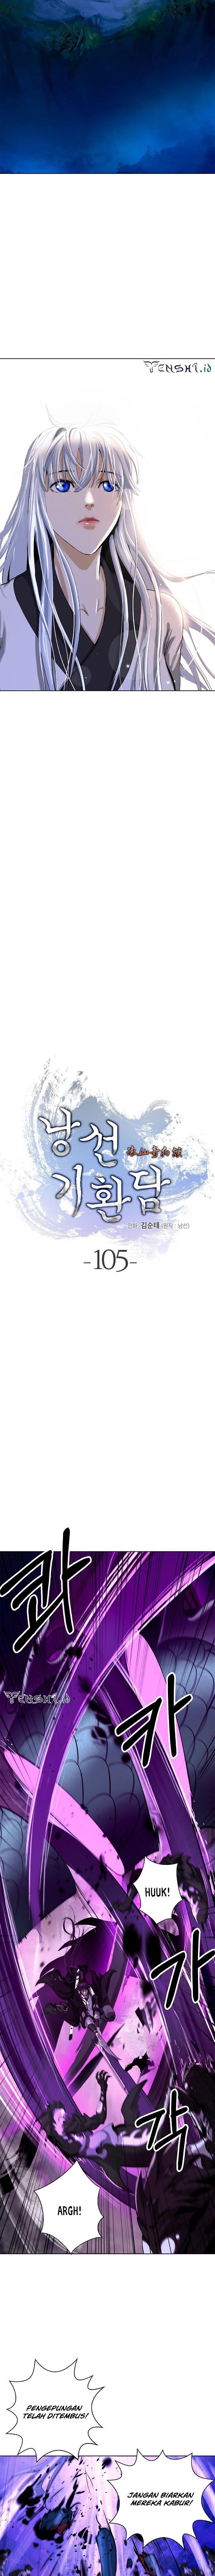 Cystic Story Chapter 105